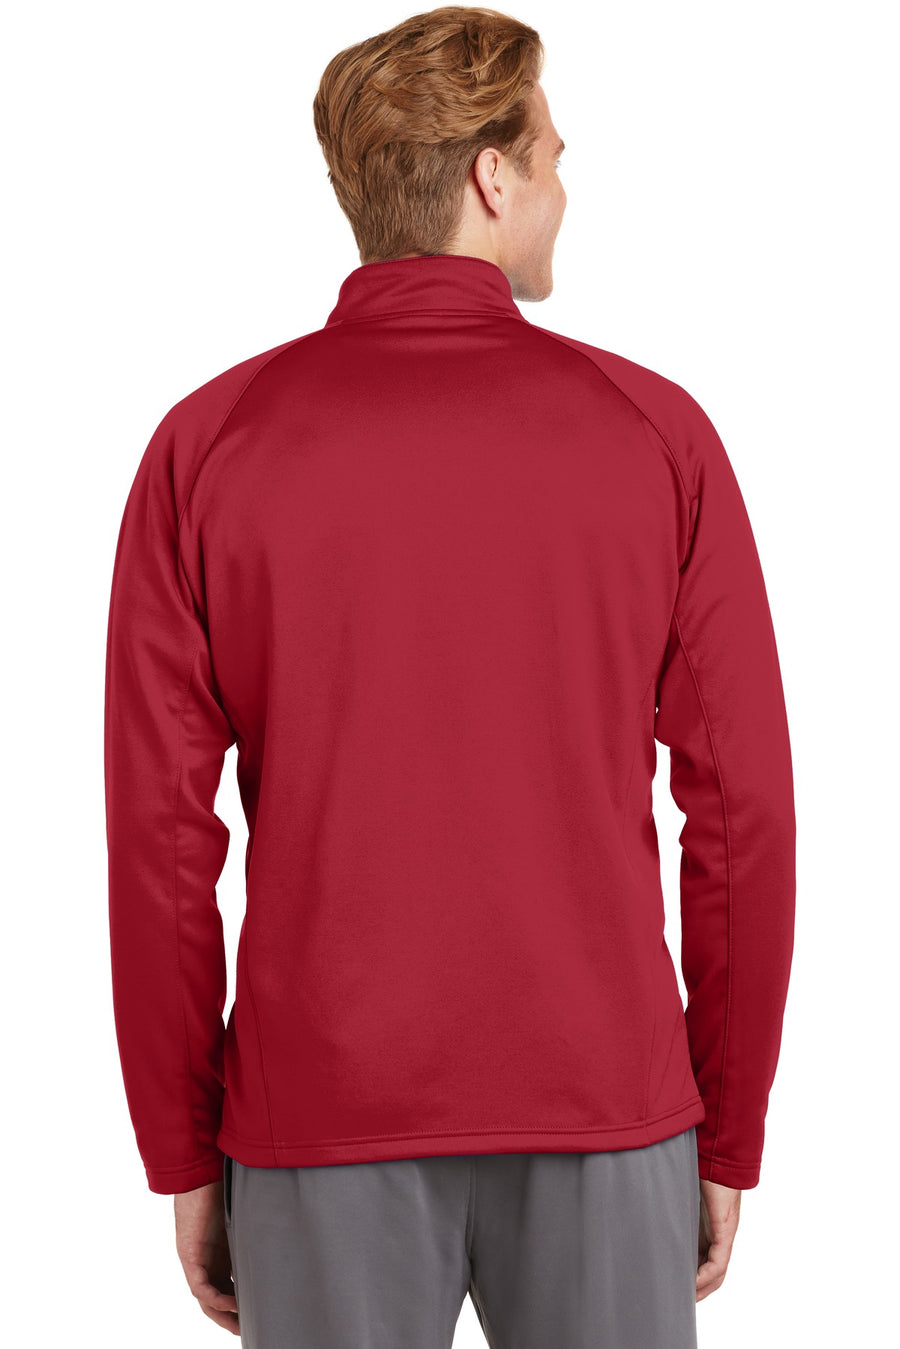 F243-Deep Red/ Silver-back_model